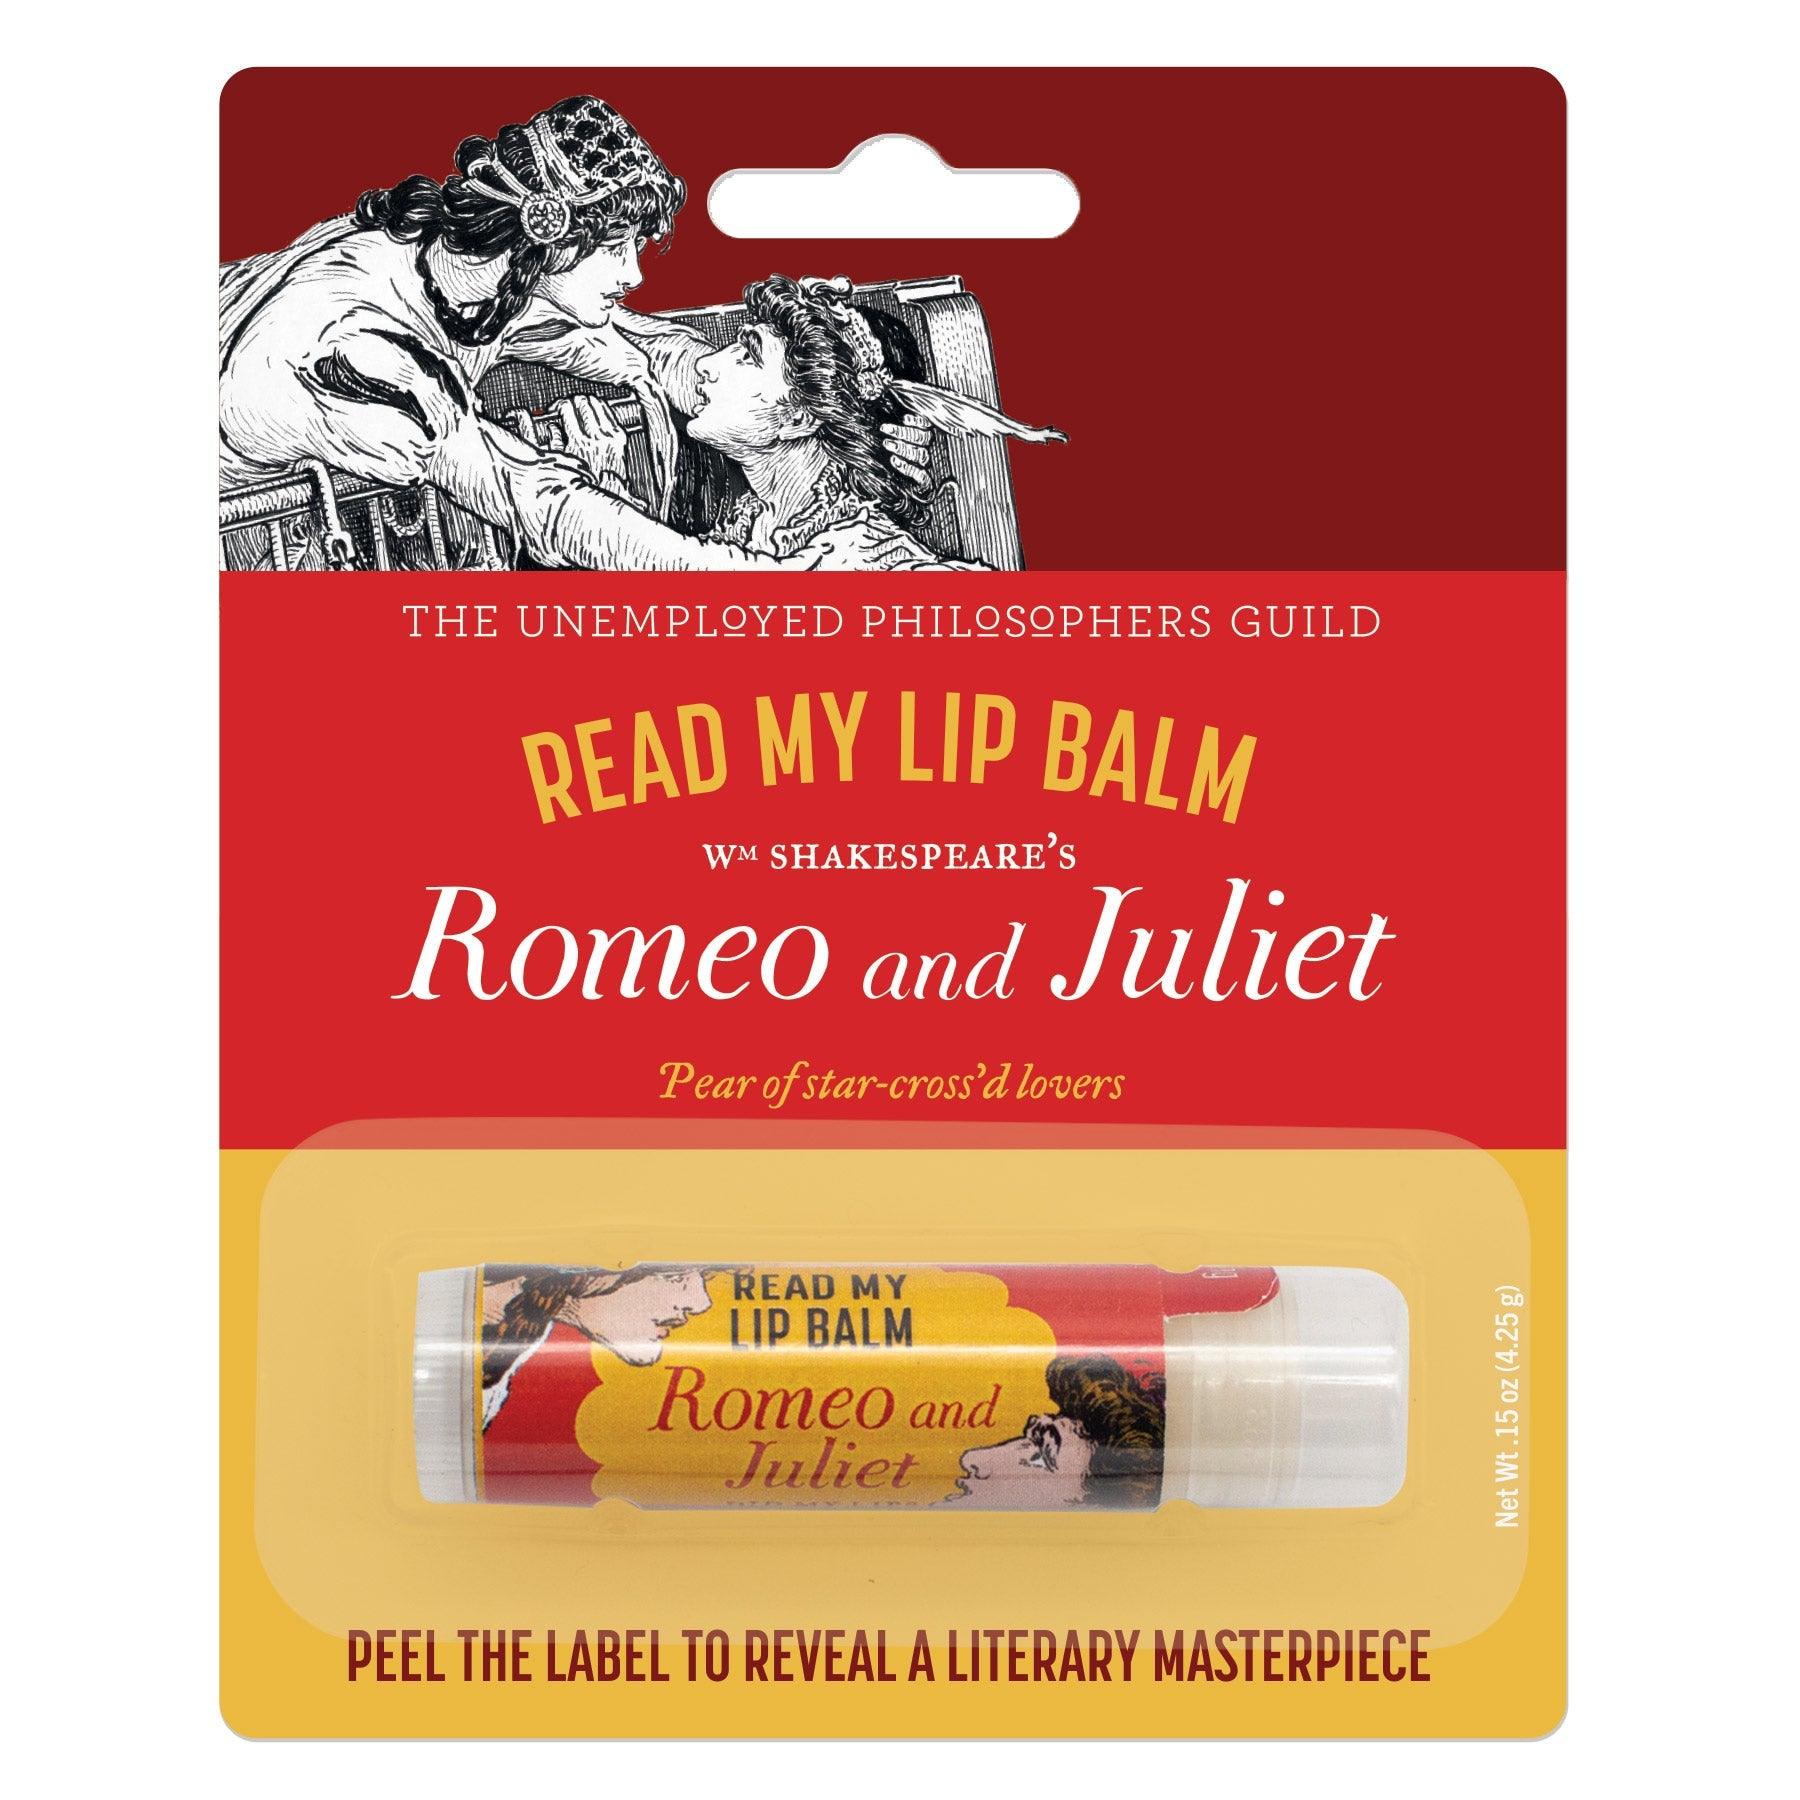 Product photo of Romeo & Juliet Read My Lip Balm, a novelty gift manufactured by The Unemployed Philosophers Guild.